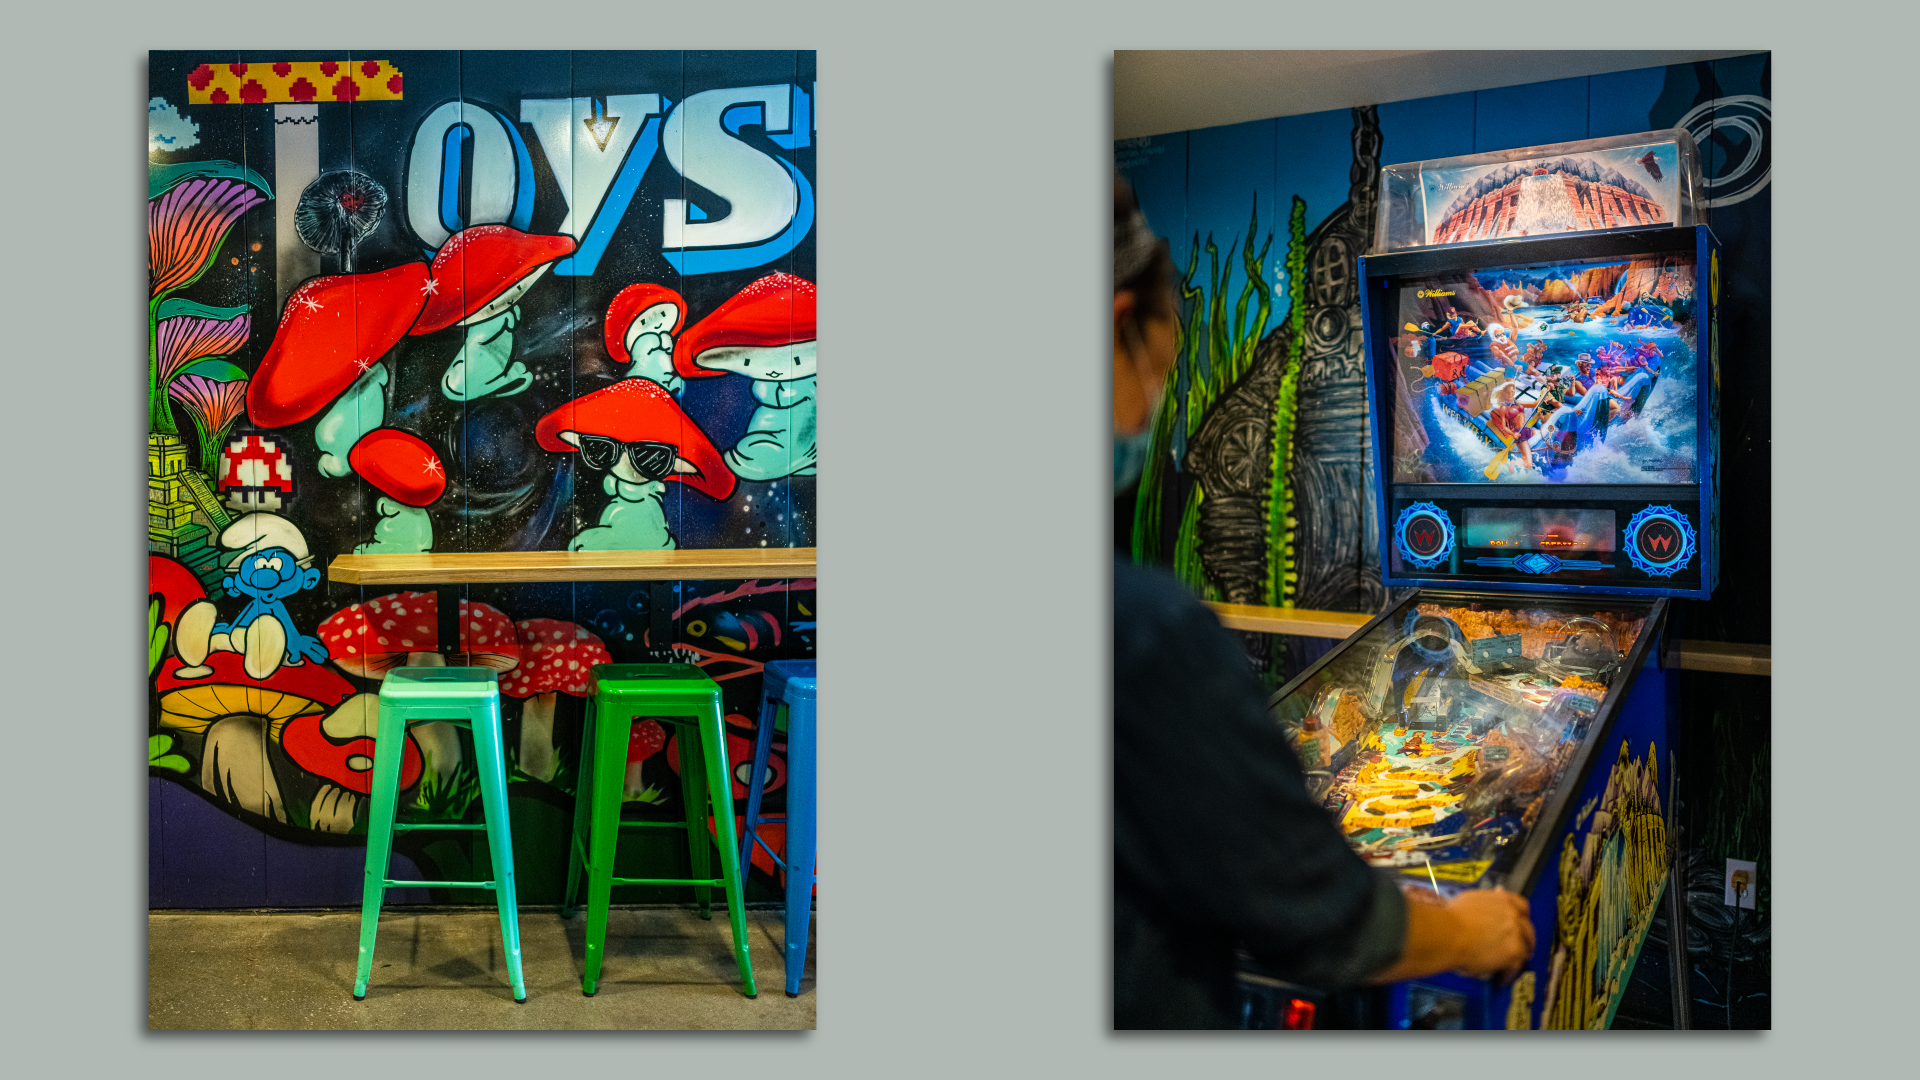 The Oyster Garage in Shaw with vintage pinball machines